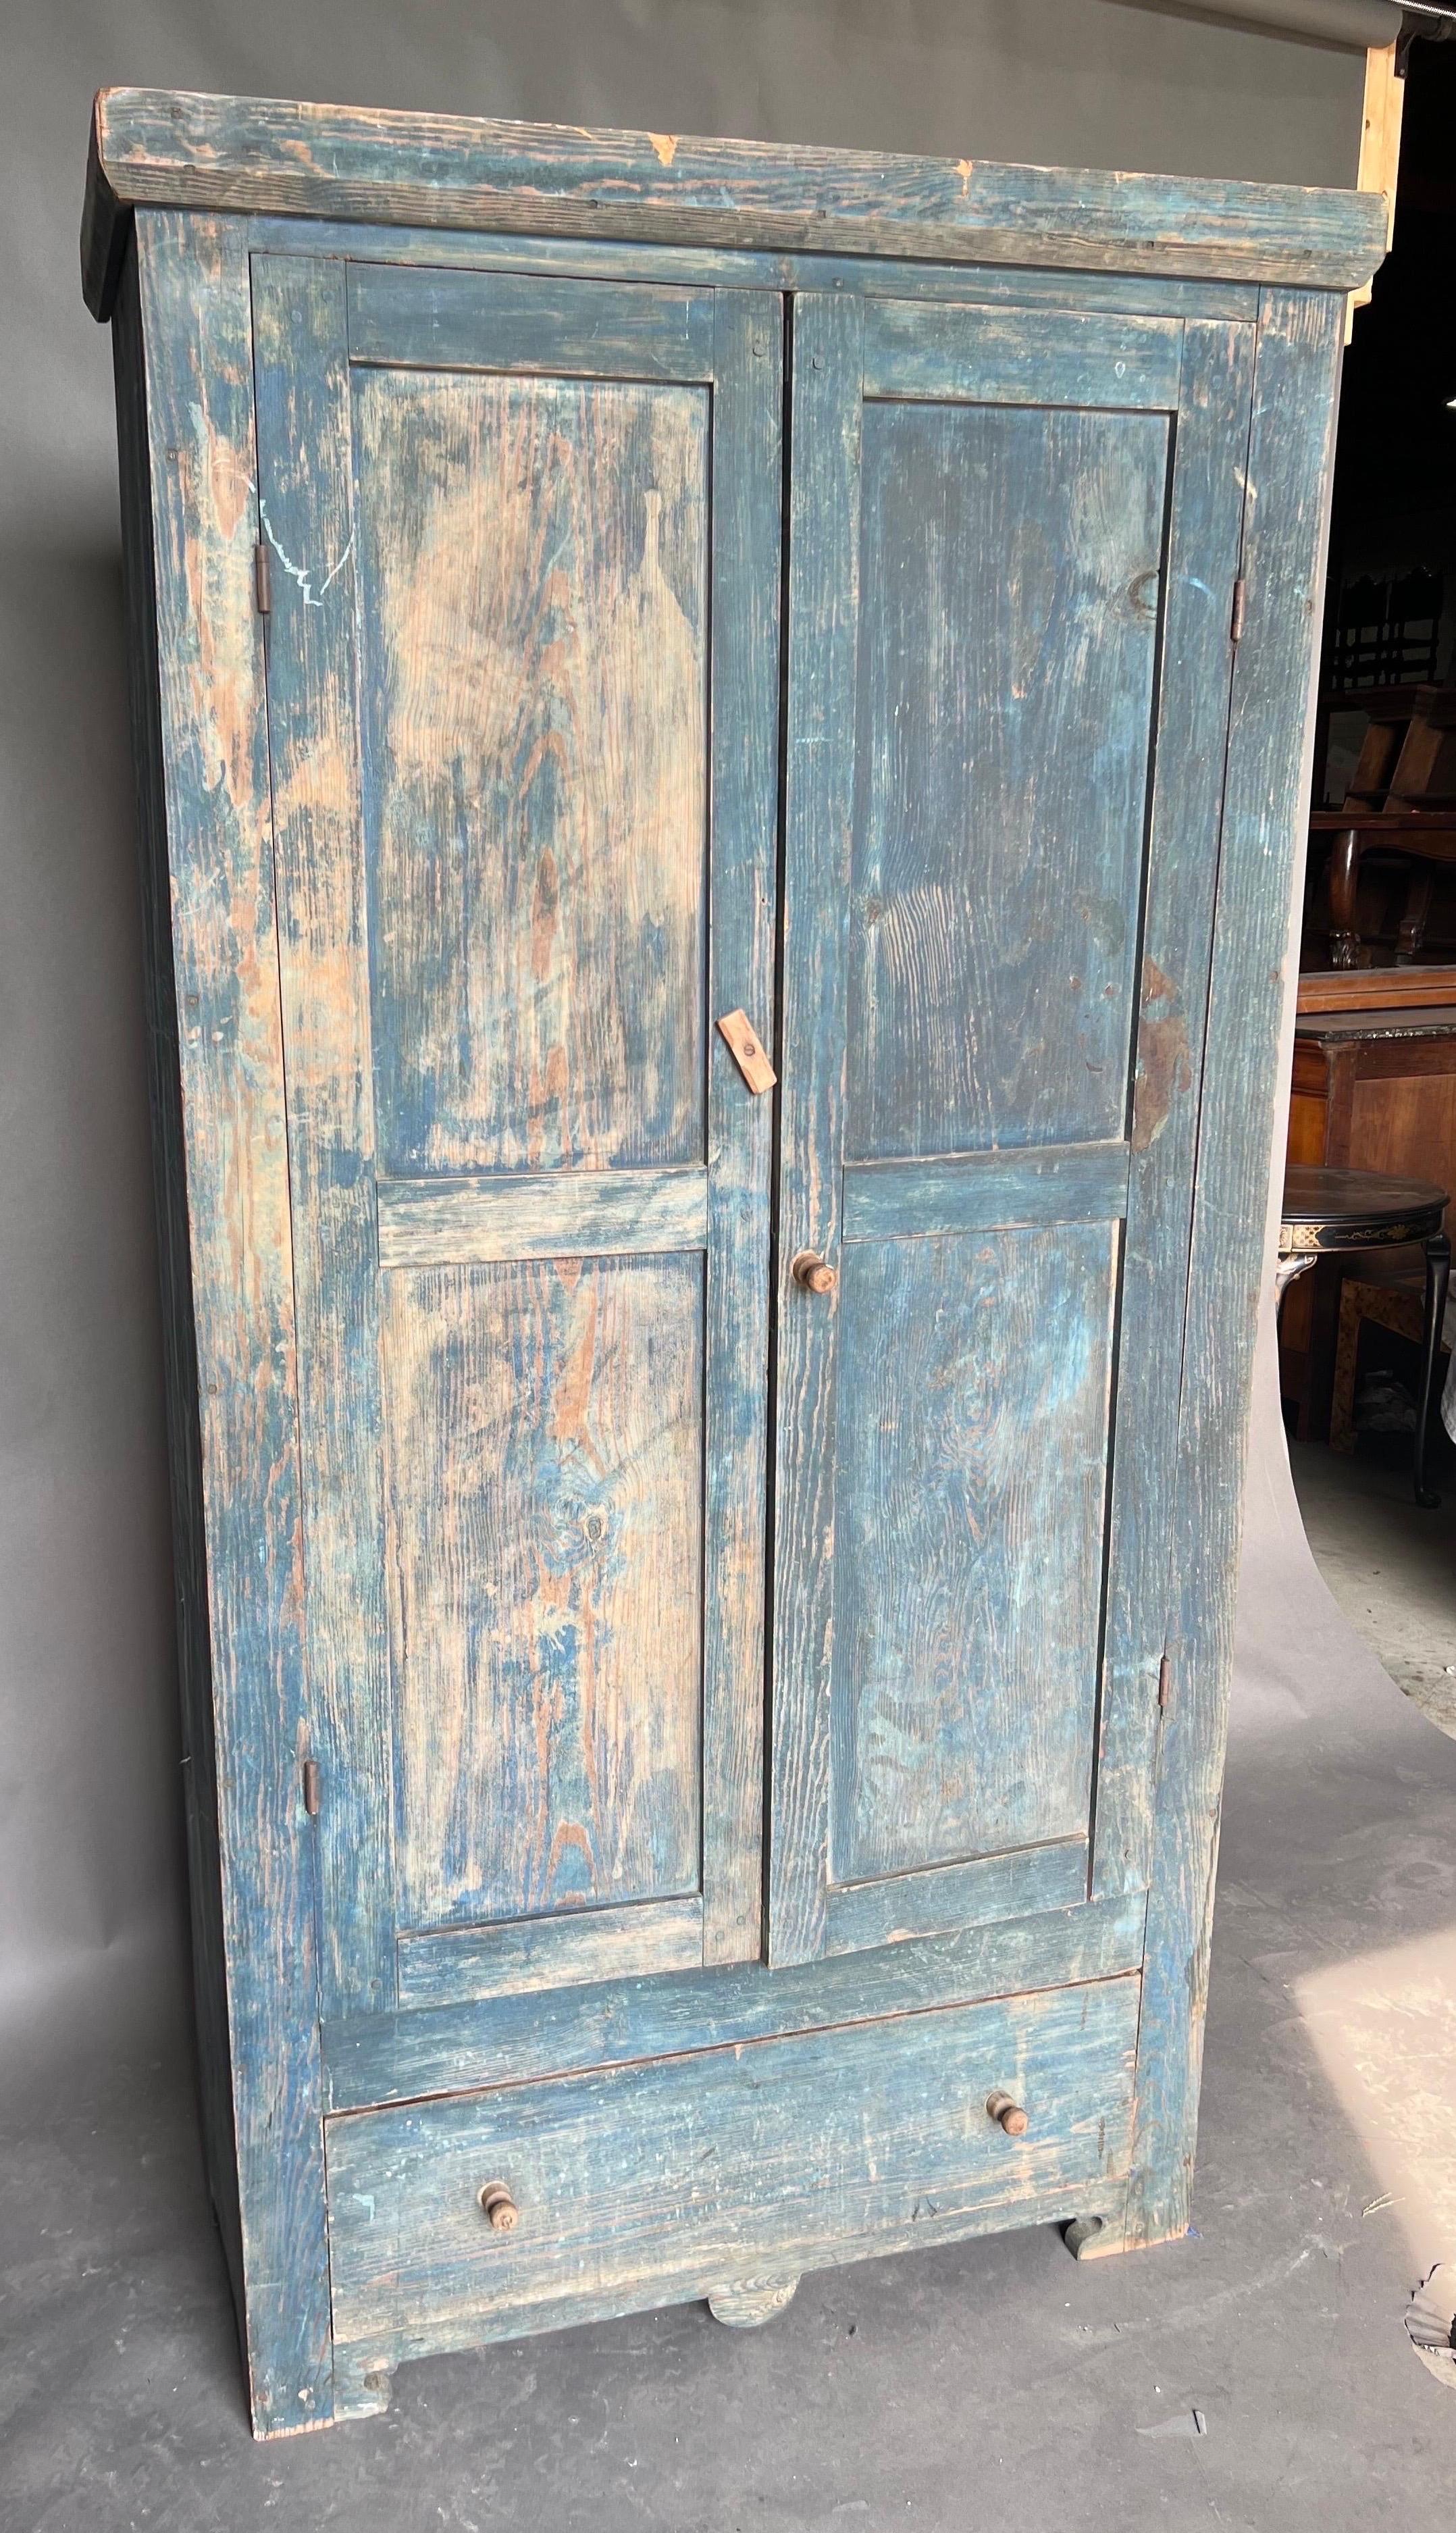 Rare 19th century North Carolina yellow pine press with drawer in original surface. Made of long leaf pine in the Piedmont of NC, this press features pinned construction, a single drawer, a country version of bracket feet and its original blue